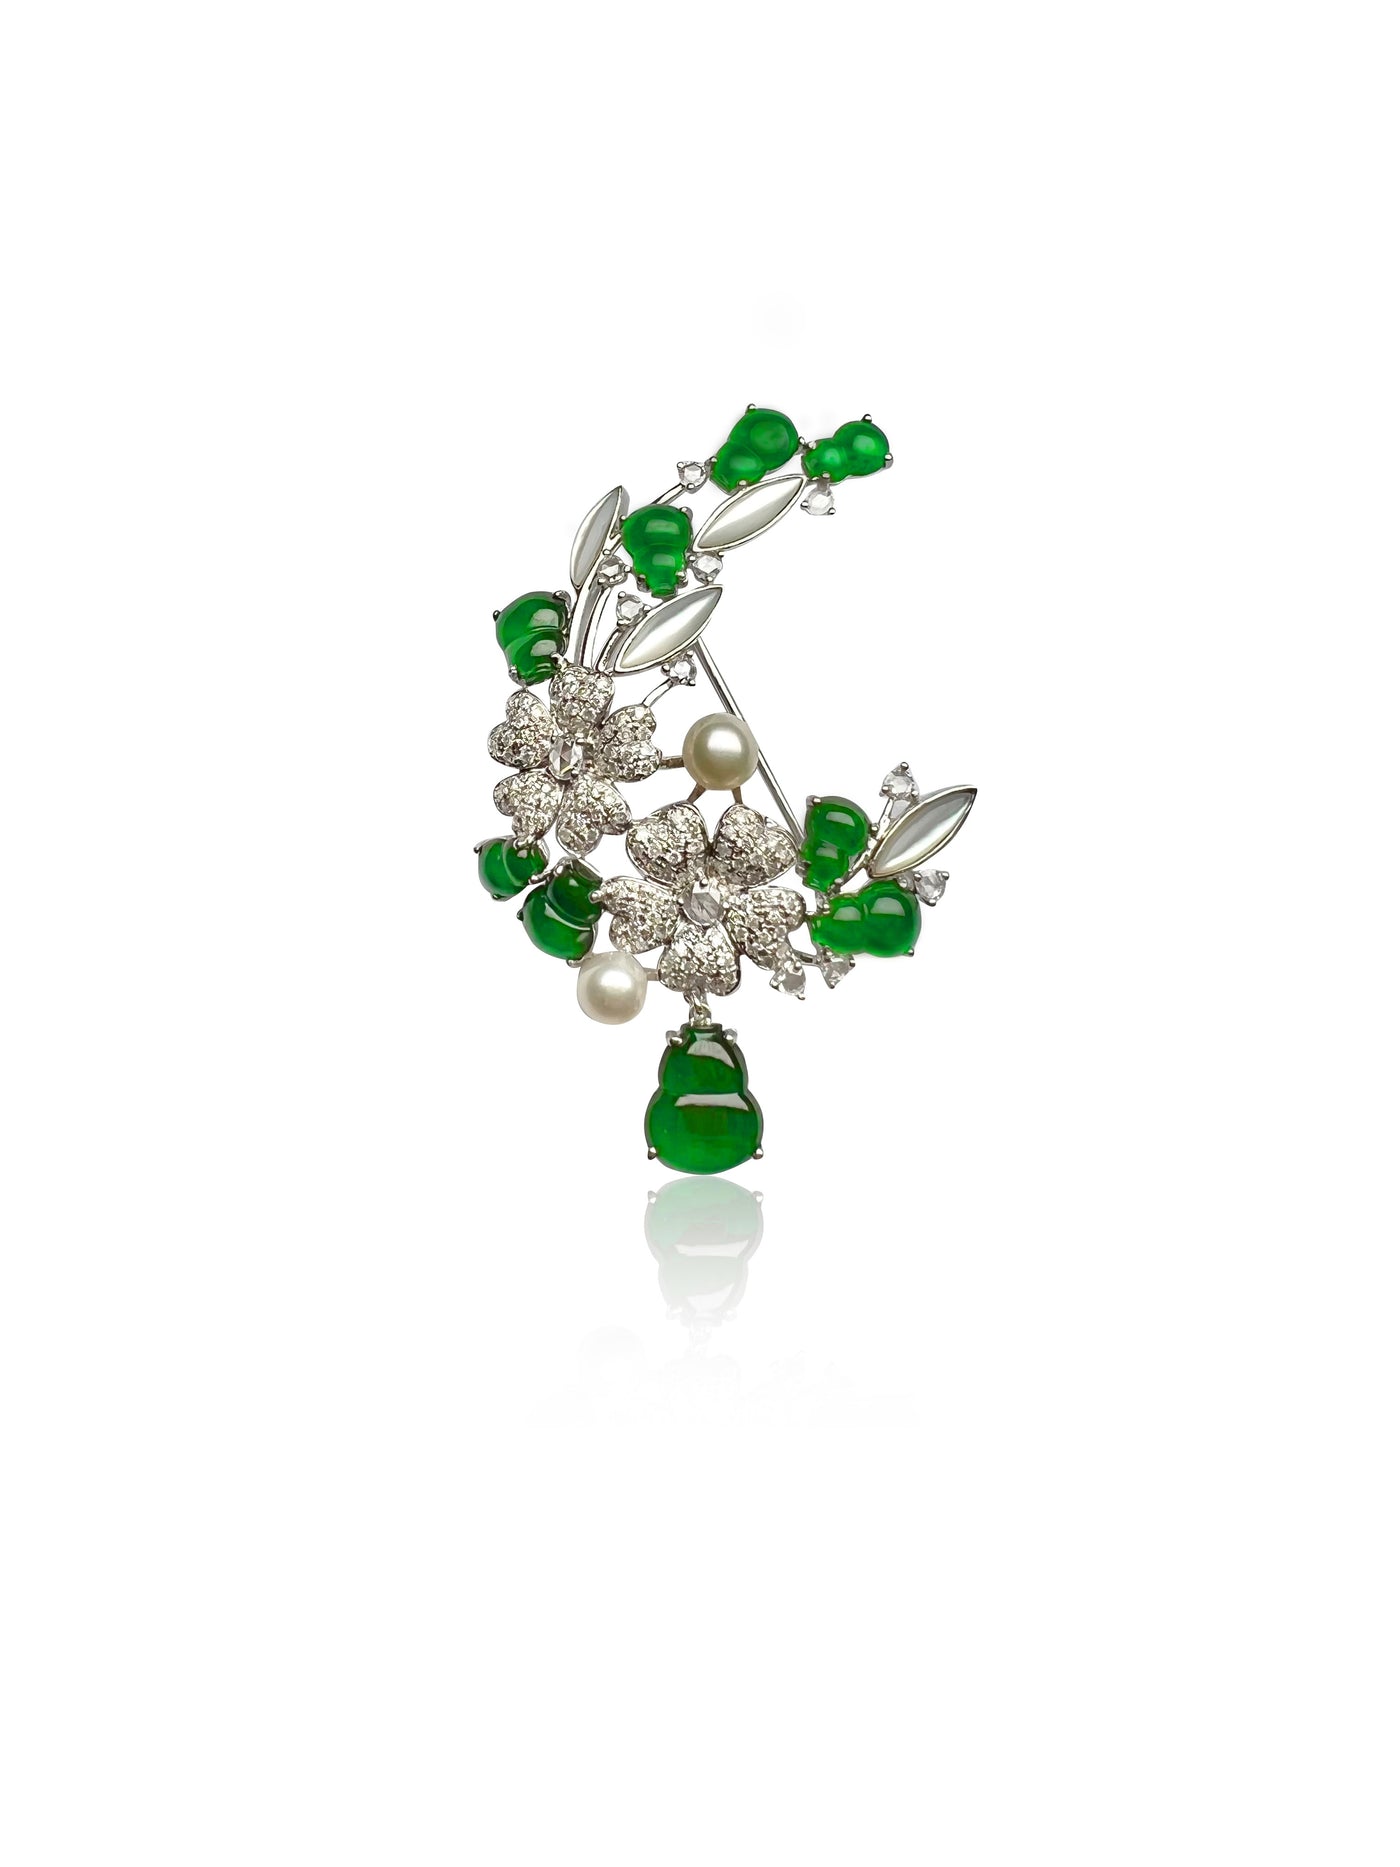 Sweet Alyssum jadeite brooch in 18k white gold with diamond and Pearl